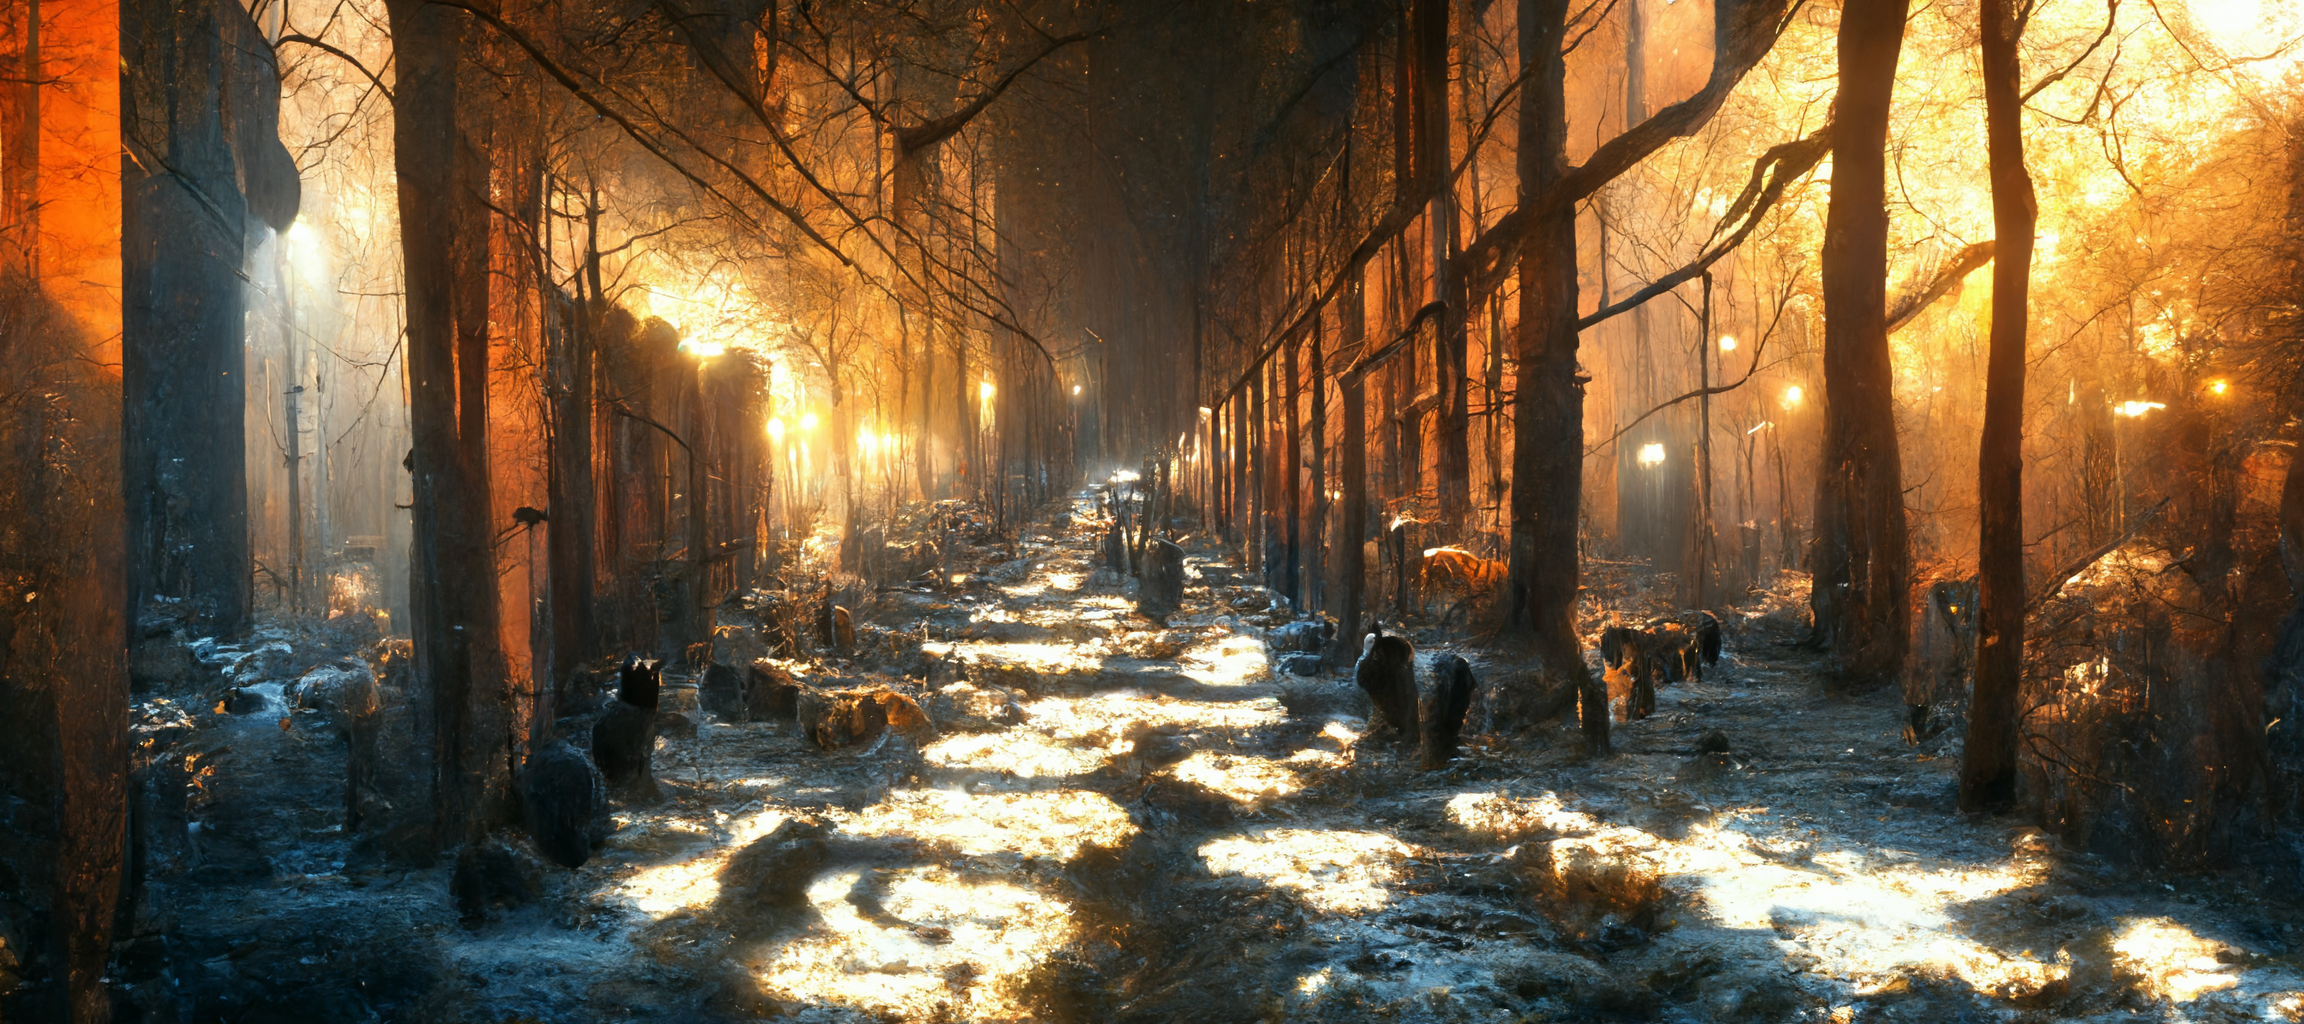 vibe_dark_back-alley_full_of_tigers_with_glowing_eyes_lots_of_t_4f1fd578-4ddc-45b3-b2f5-b57f762e51c9